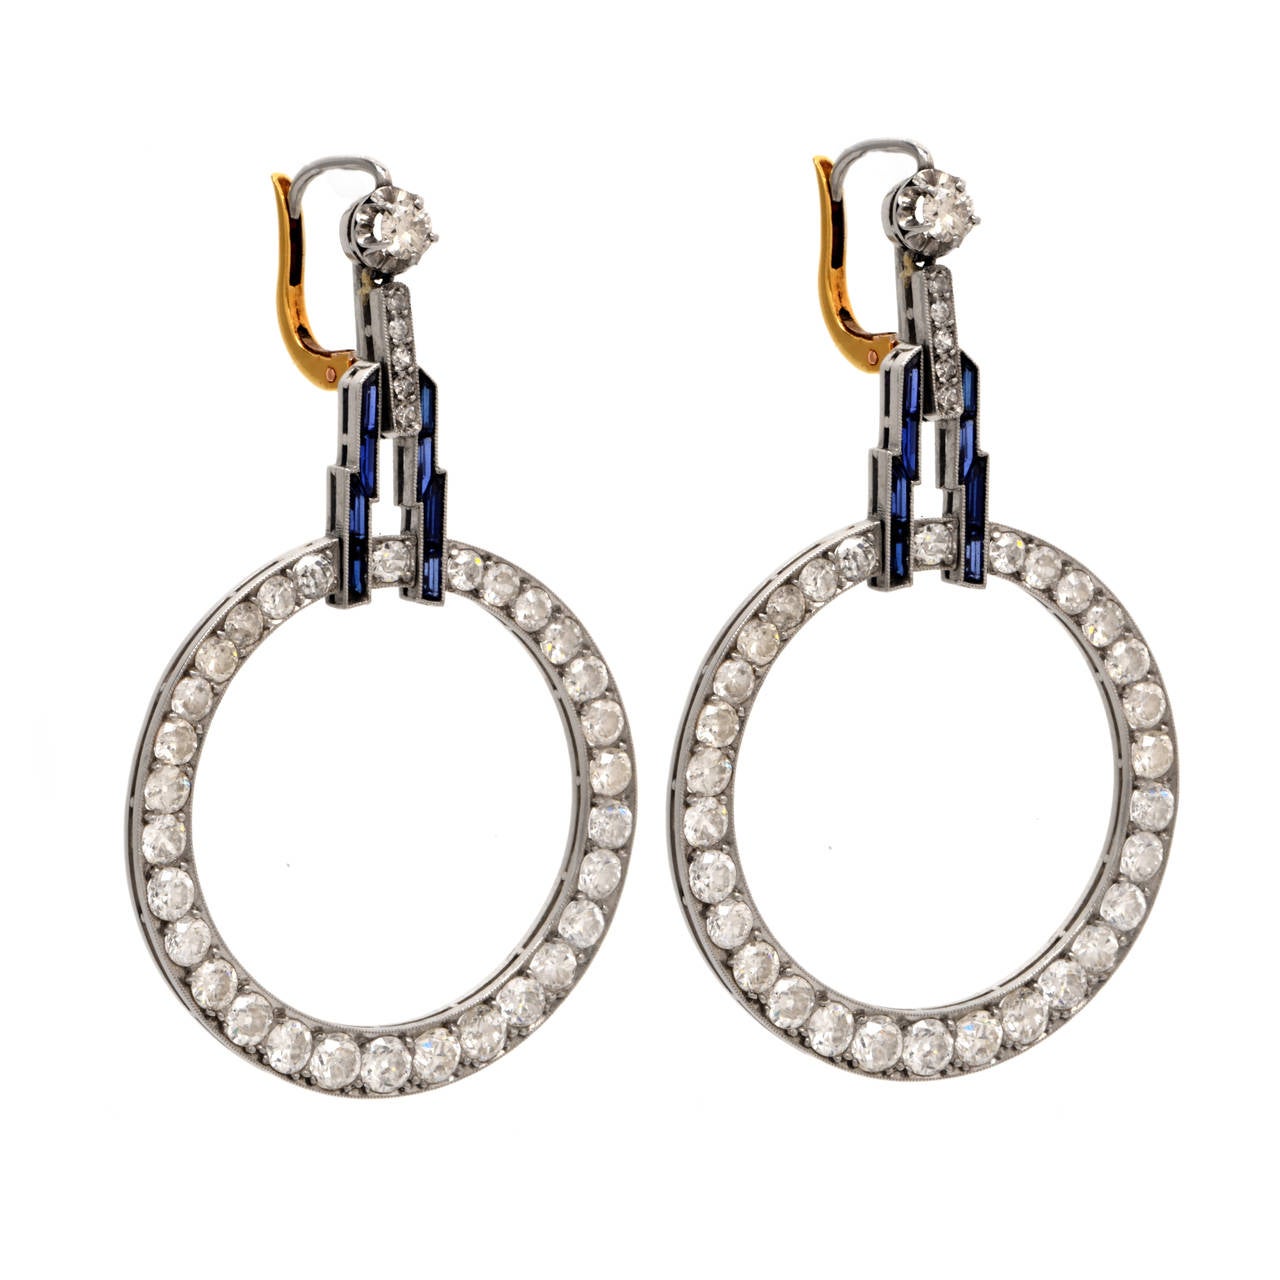 These fabulous and  rare antique Art Deco  earrings of  impeccable design and workmanship are crafted in  solid platinum with  yellow gold  lever-backs, weighing 12.8 grams and measuring 2